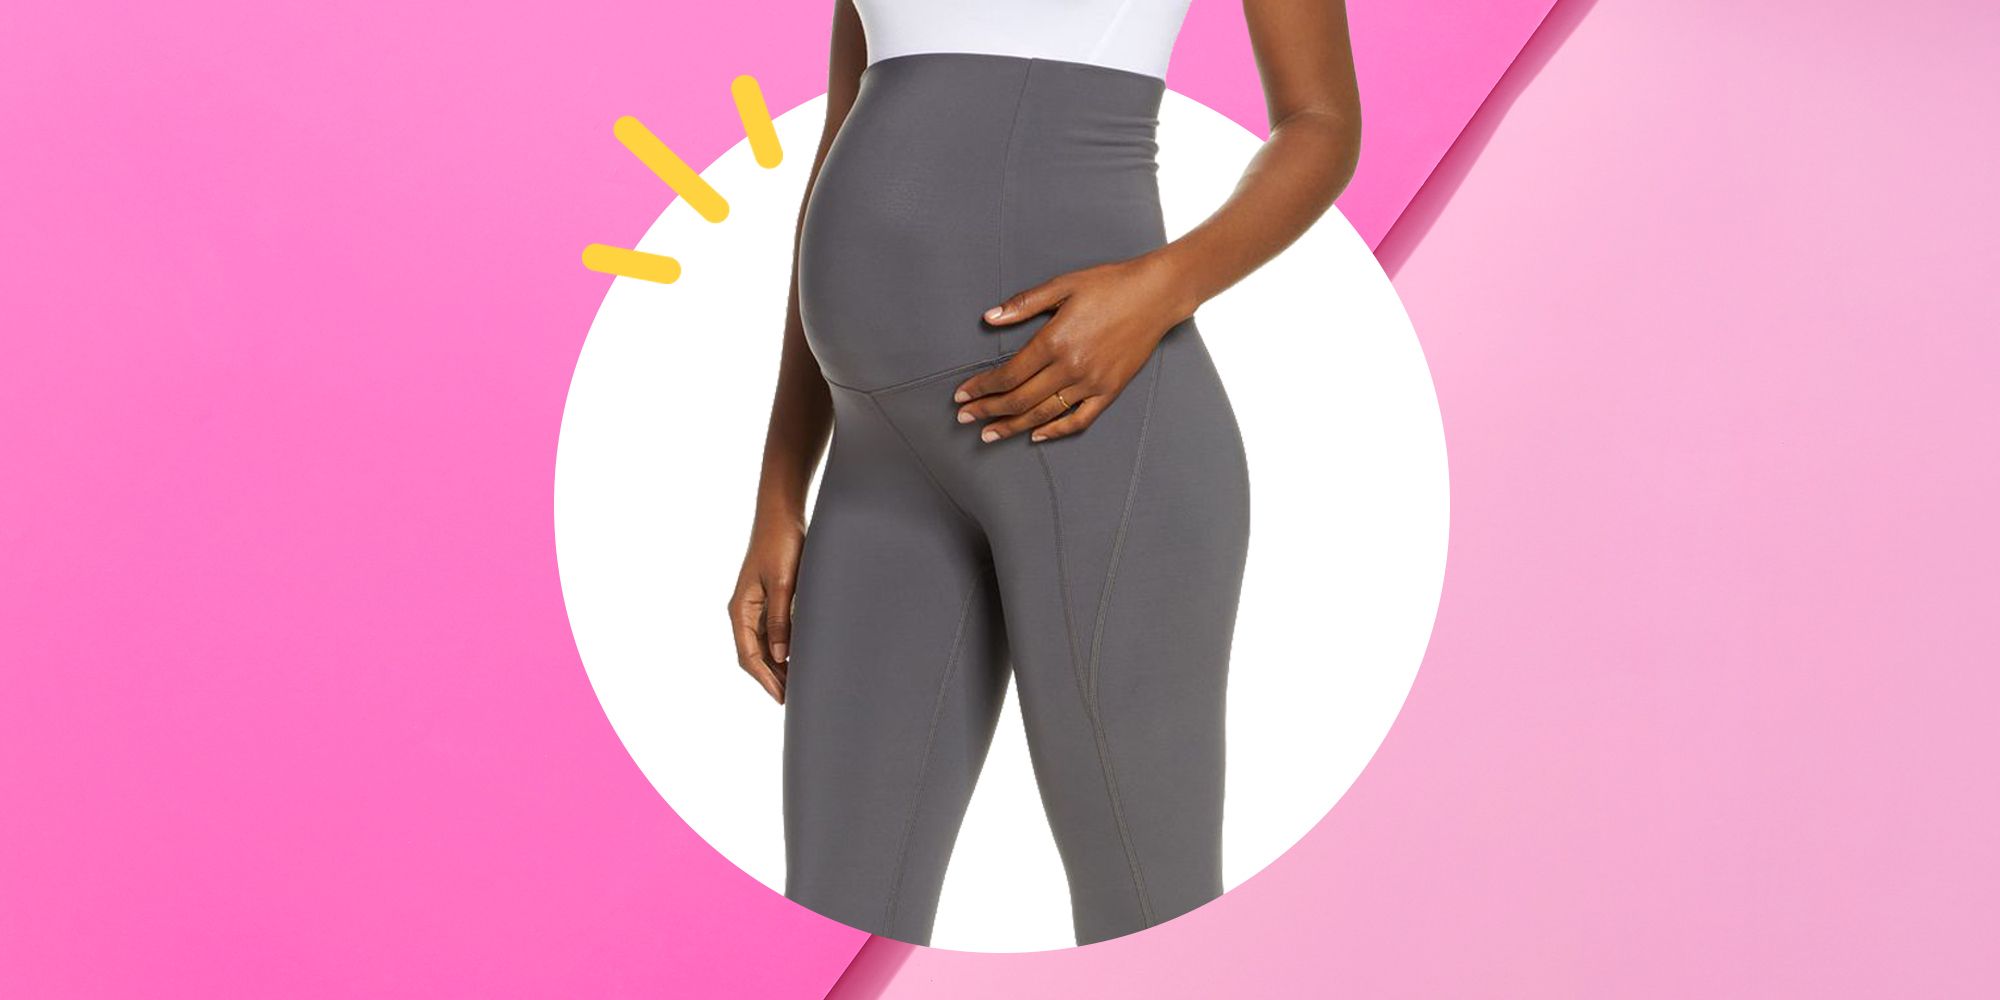 Tagoo Maternity Leggings Over the Belly Pregnancy Workout Yoga Pants with Pockets Maternity Clothes for Pregnant Women 